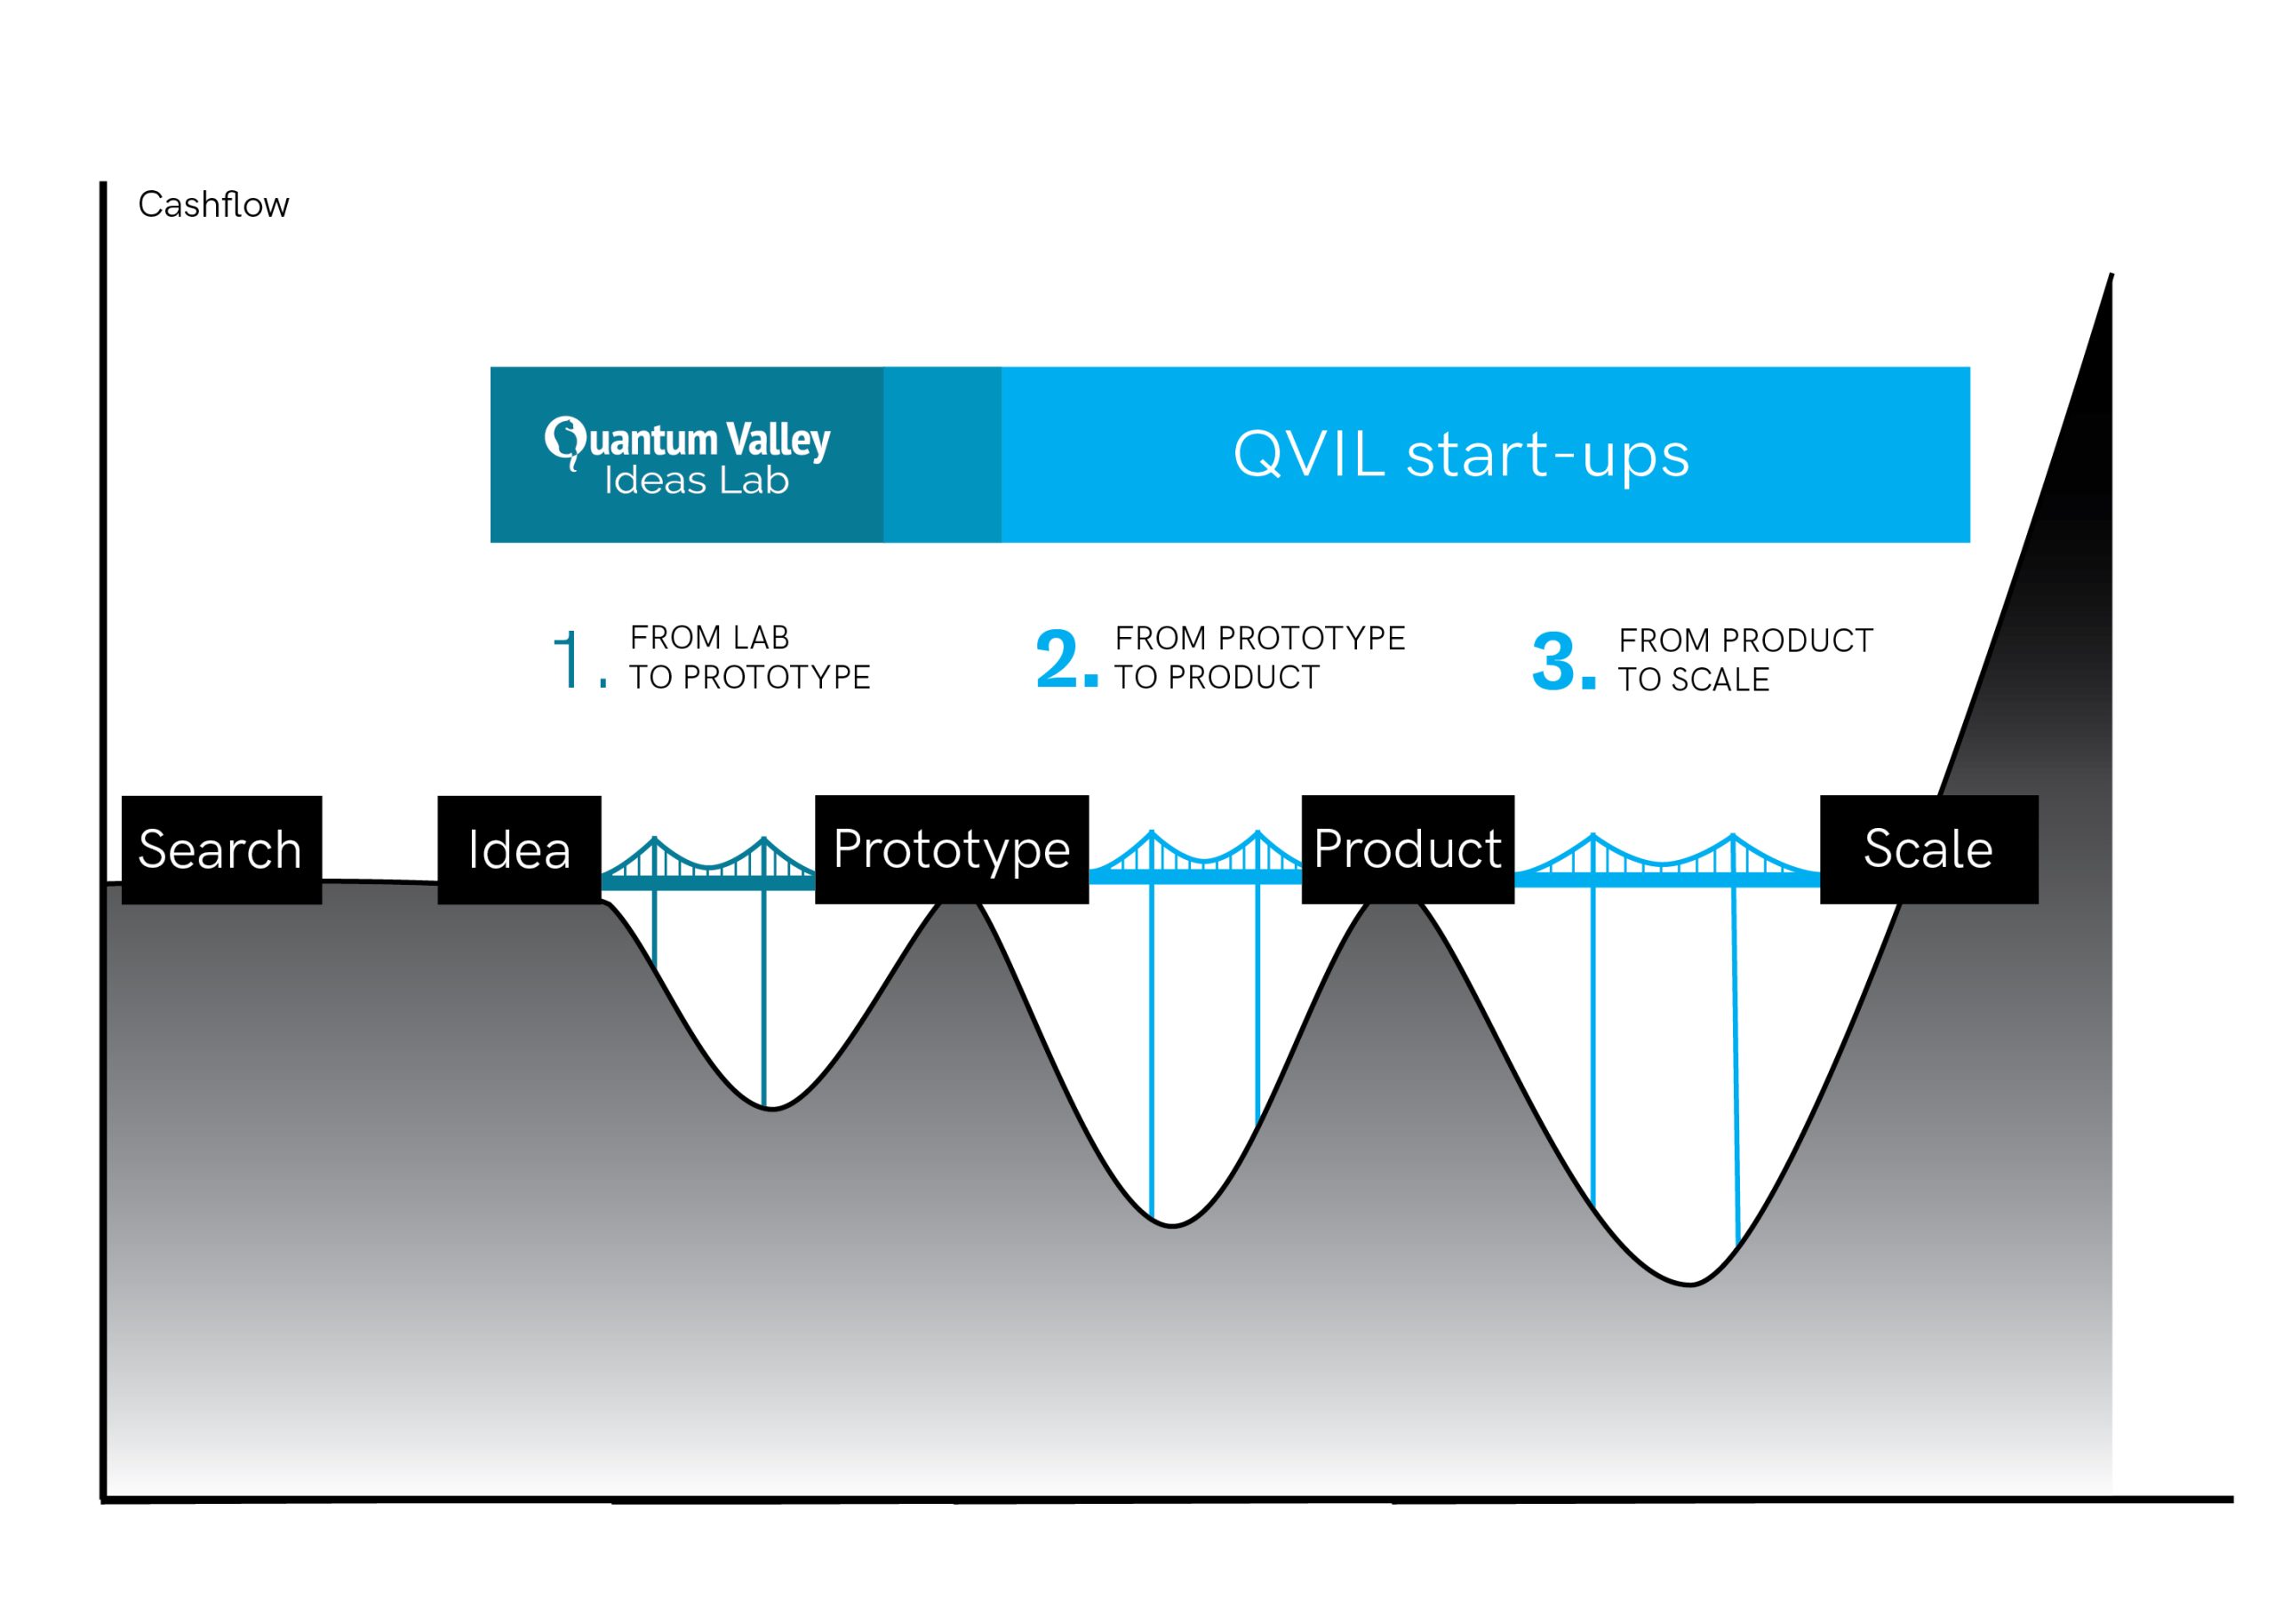 A series of hills, labelled “search”, “idea”, “prototype”, “product”, and “scale”. QVIL bridges the gap between lab and prototype, while its startups bridge prototype, product, and scale.